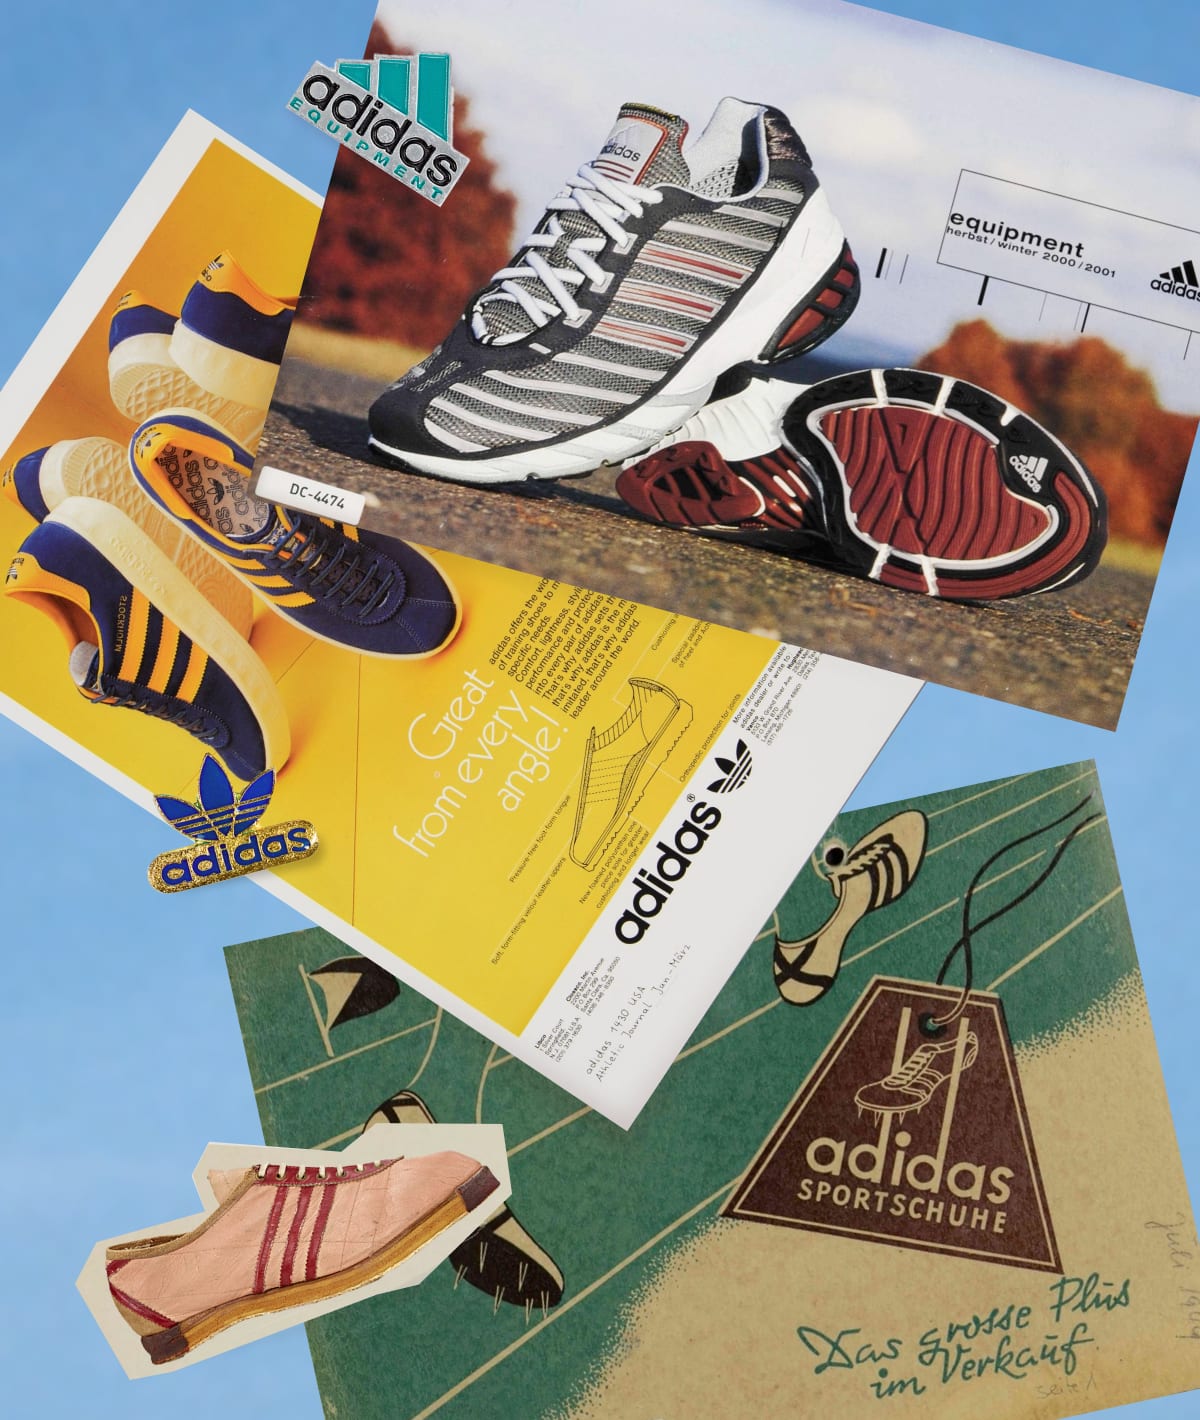 Signature Adidas Sneaker Is Latest Sign Of Marketing Success For